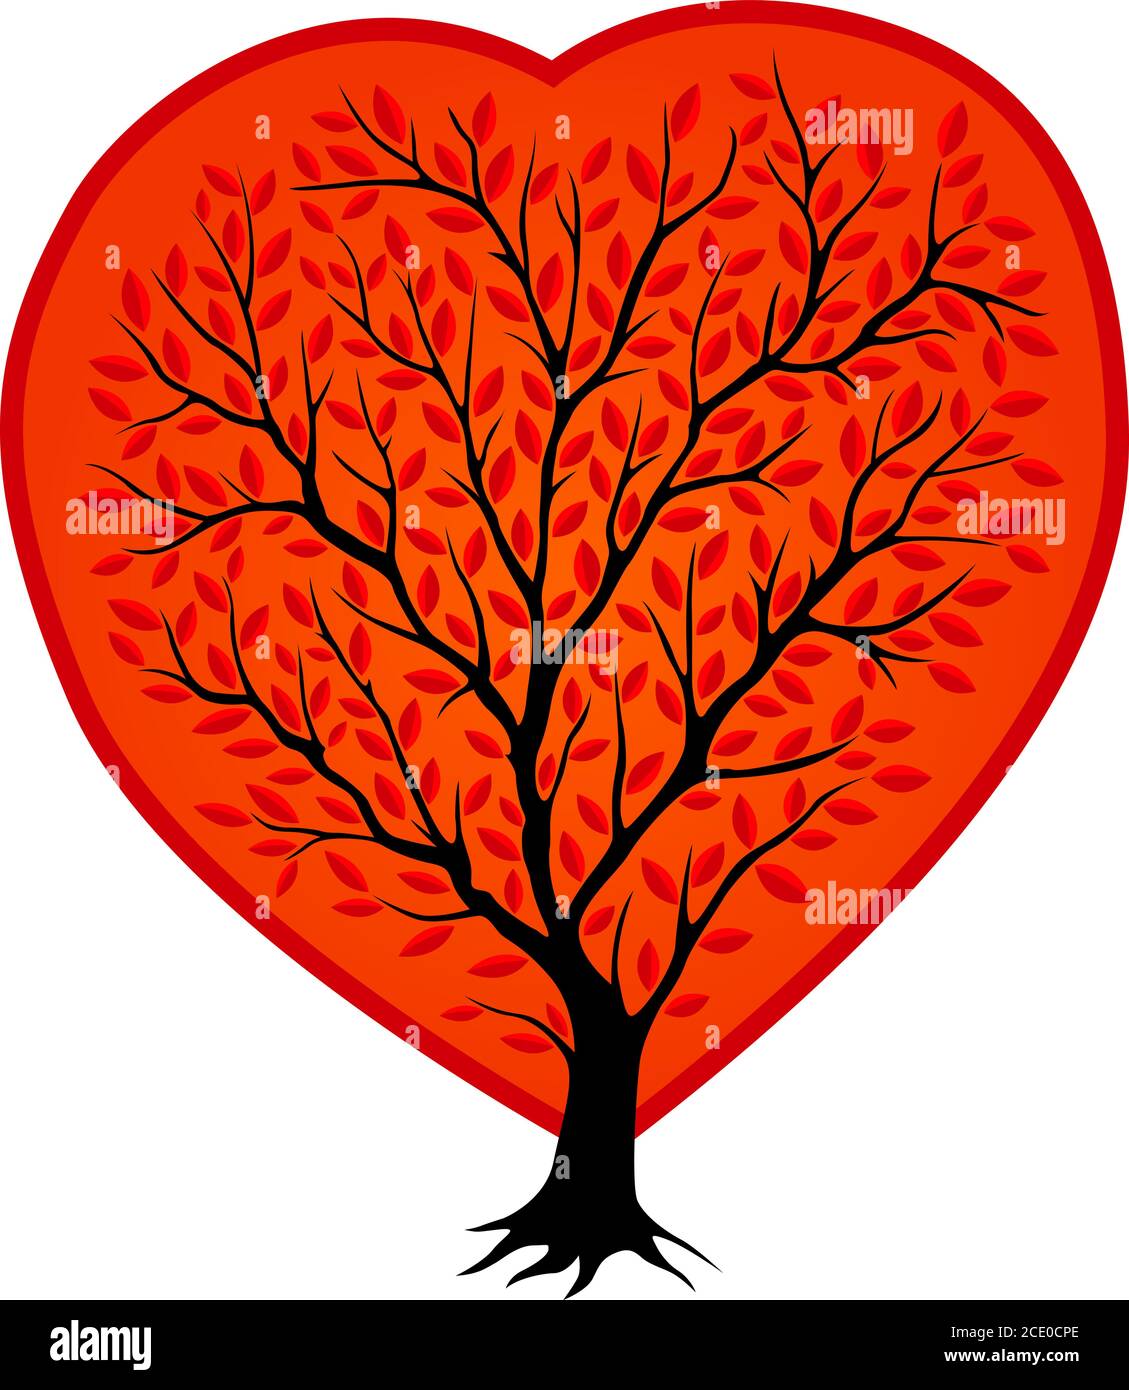 Beautiful clipart with black tree silhouette in the red shape of heart on white background Stock Vector